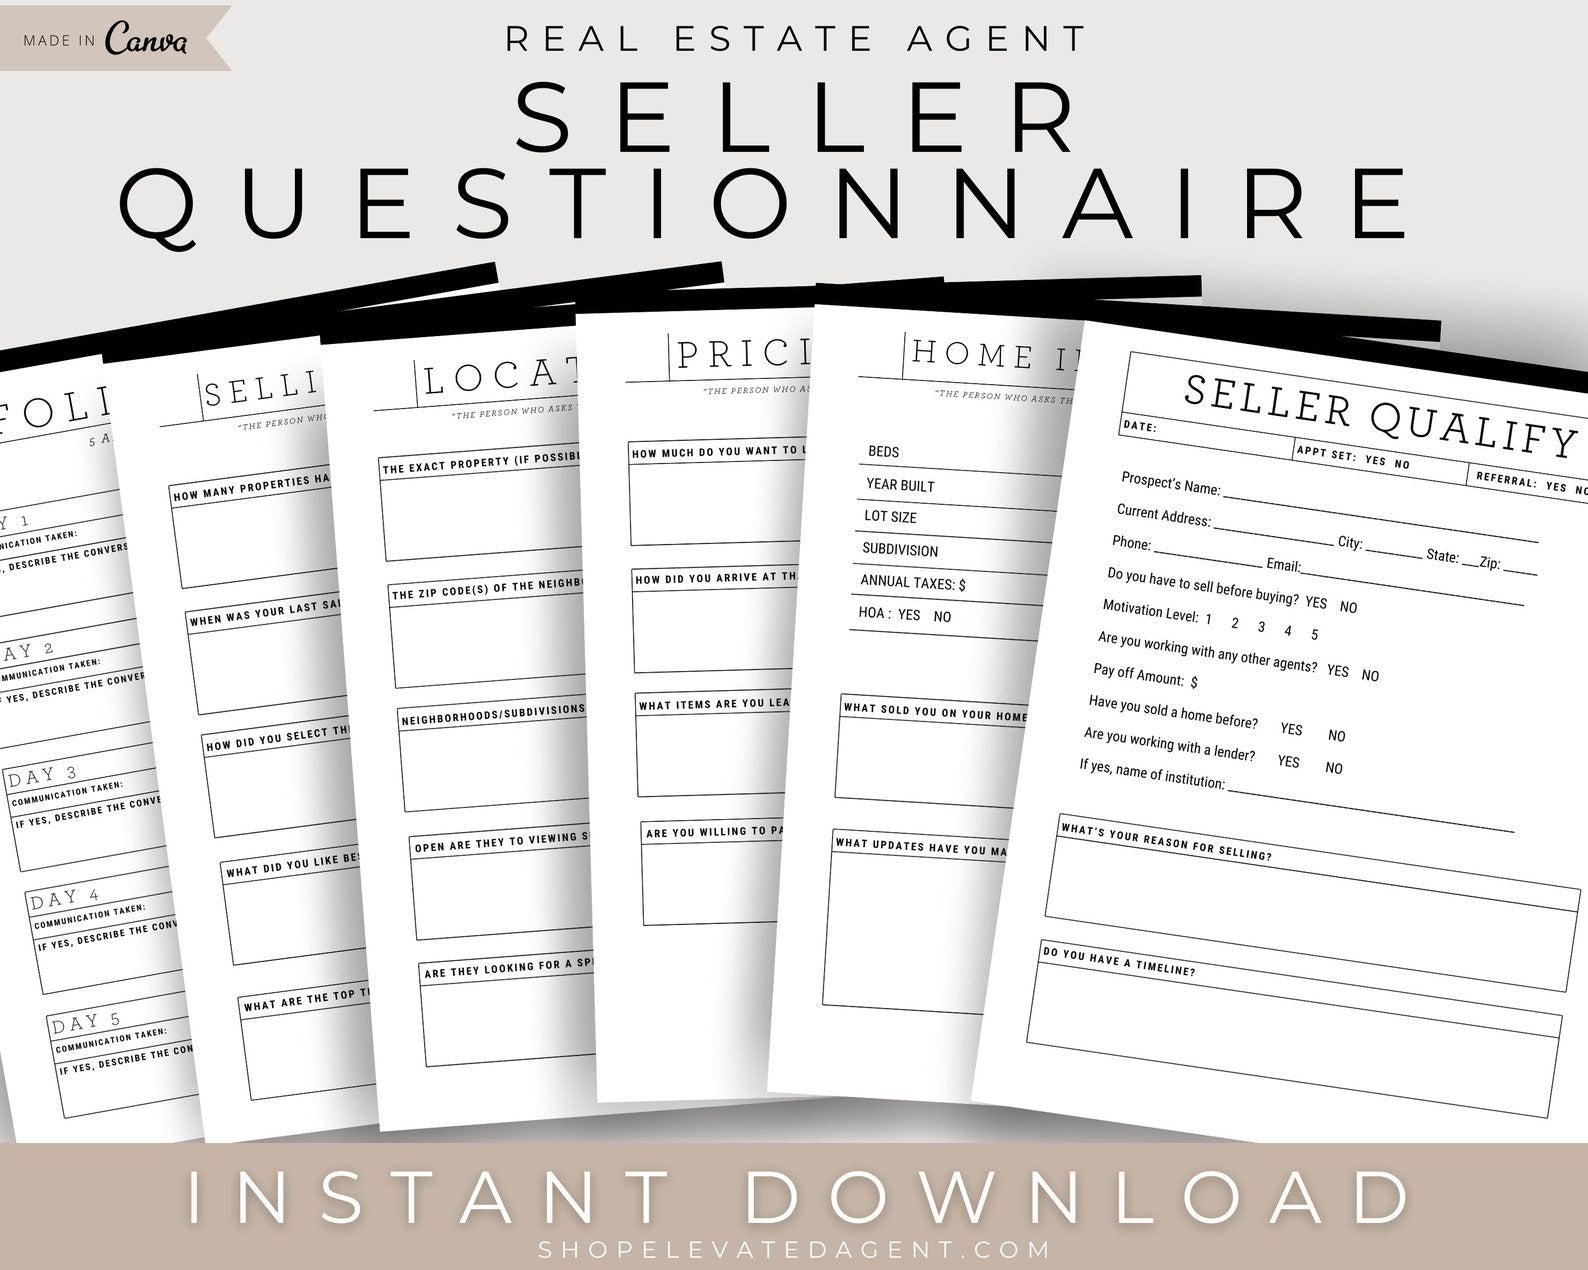 Real Estate Agent Seller Questionnaire Instant Download